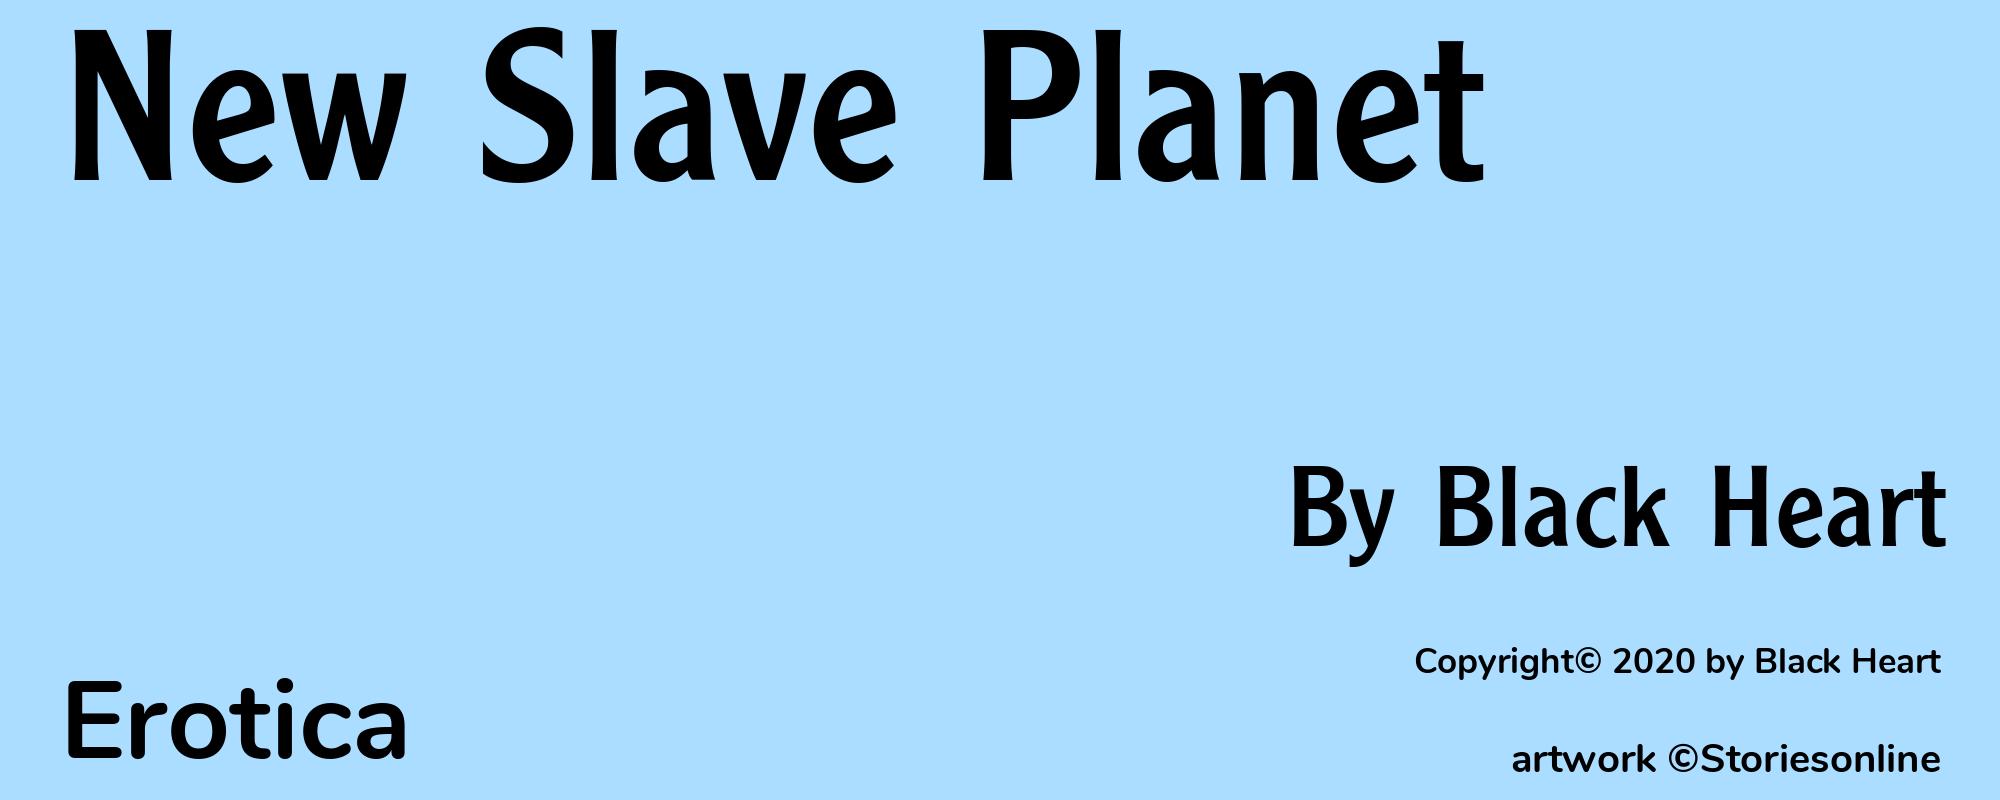 New Slave Planet - Cover